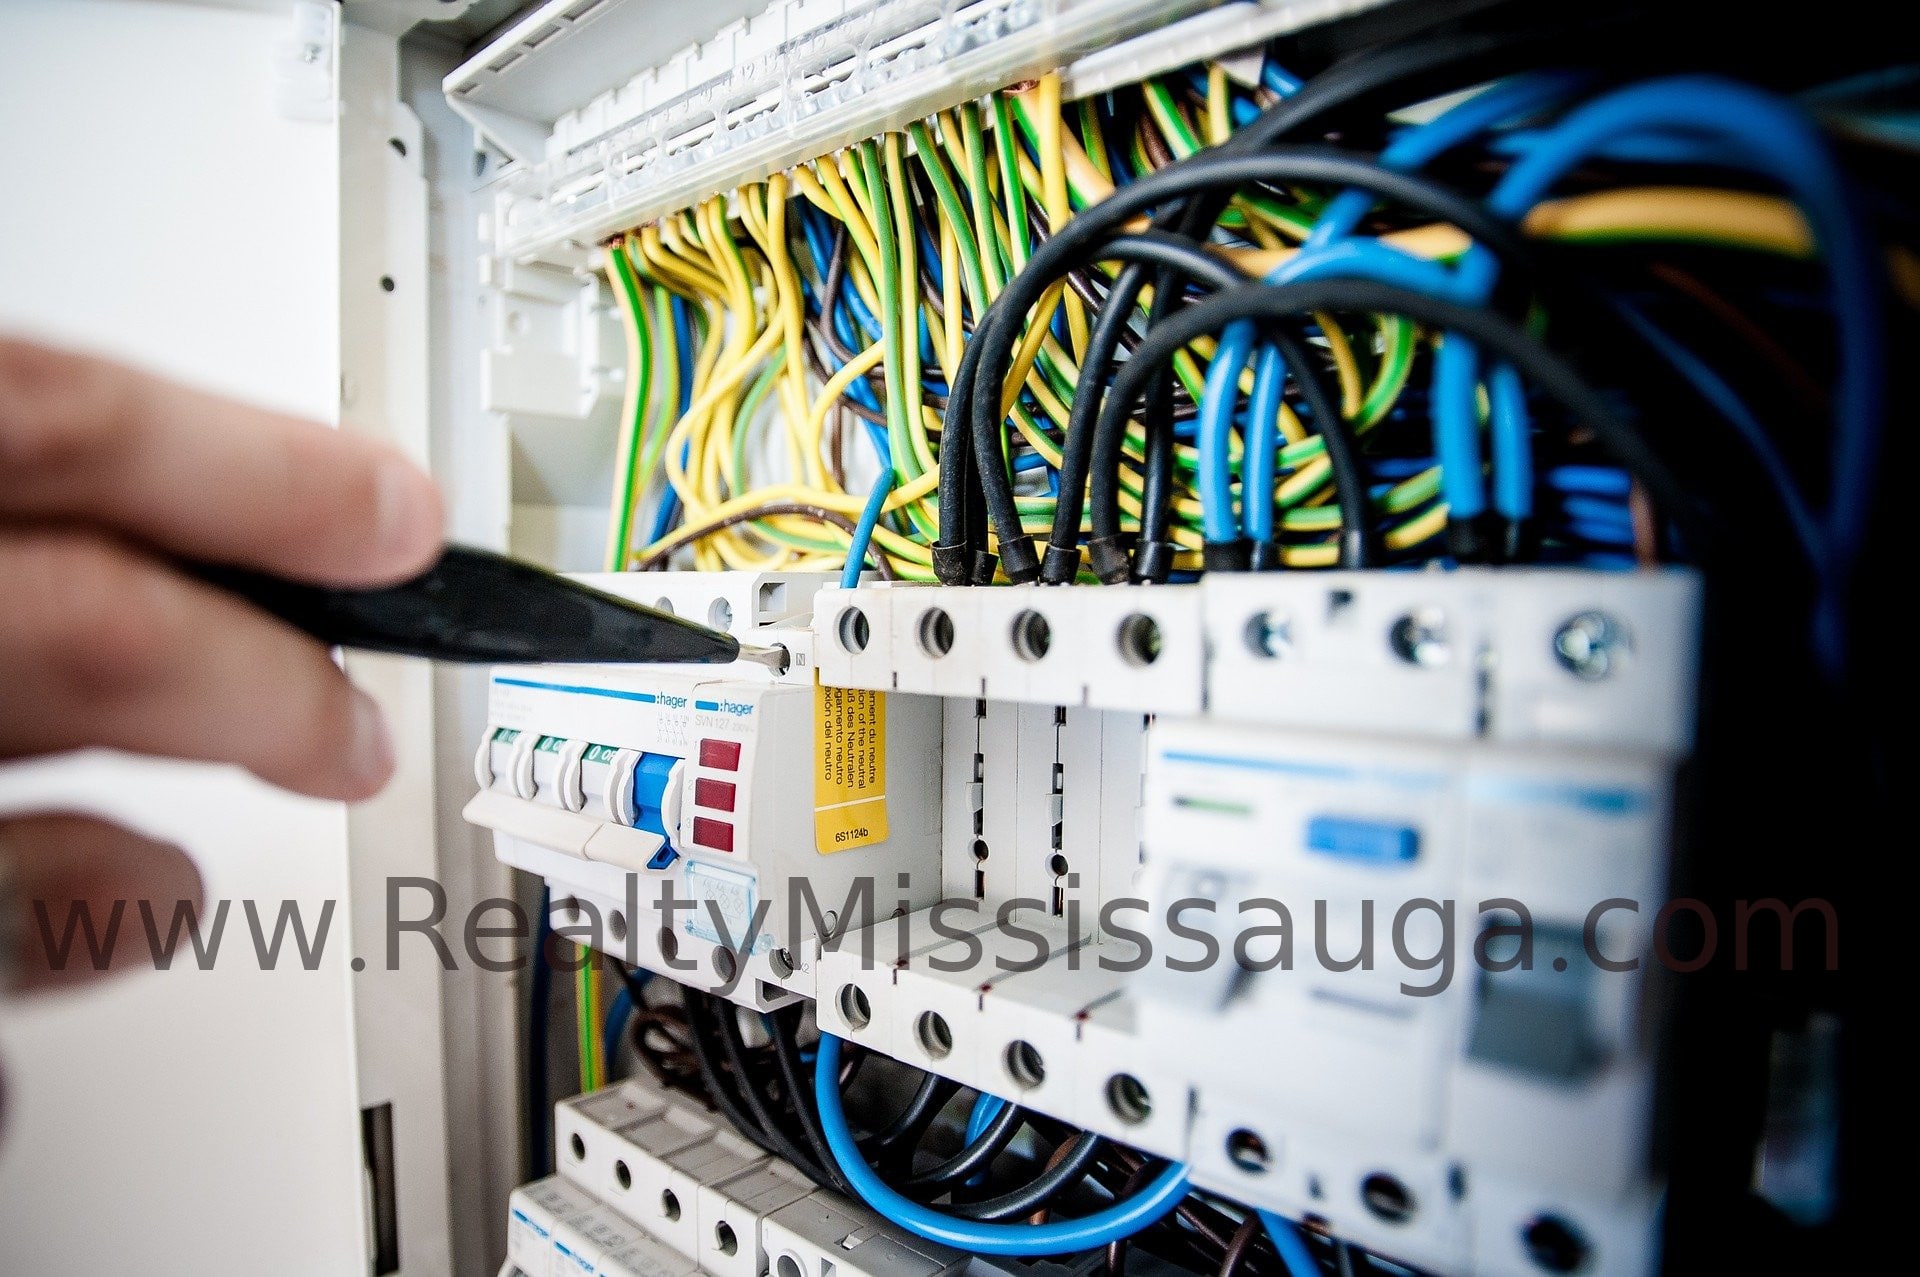 You are currently viewing Start Electrical Wiring Business (Building Wiring Business) in Mississauga